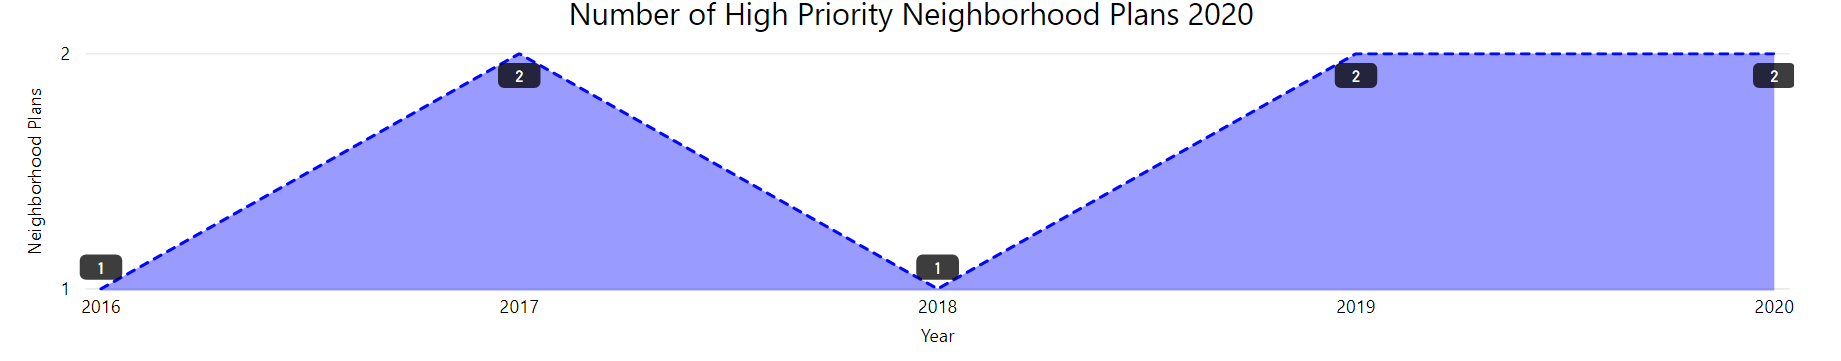 graph showing the number of high priority neighborhood plans from 2016 to 2020. The number has fluctuated between one and two .